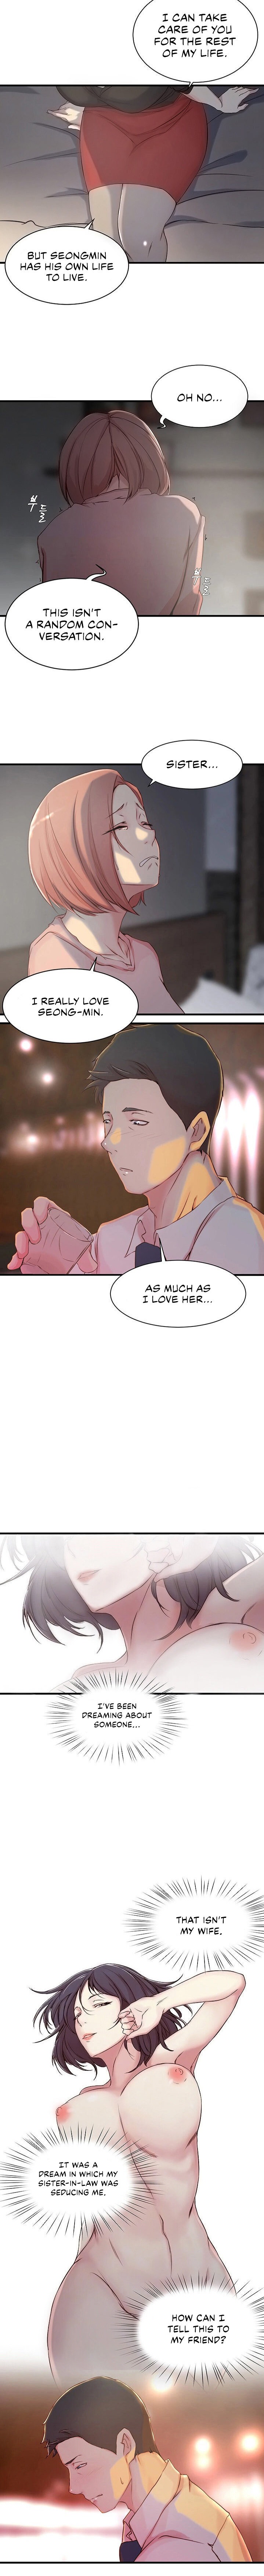 Sister-in-Law Manhwa - Chapter 5 Page 5